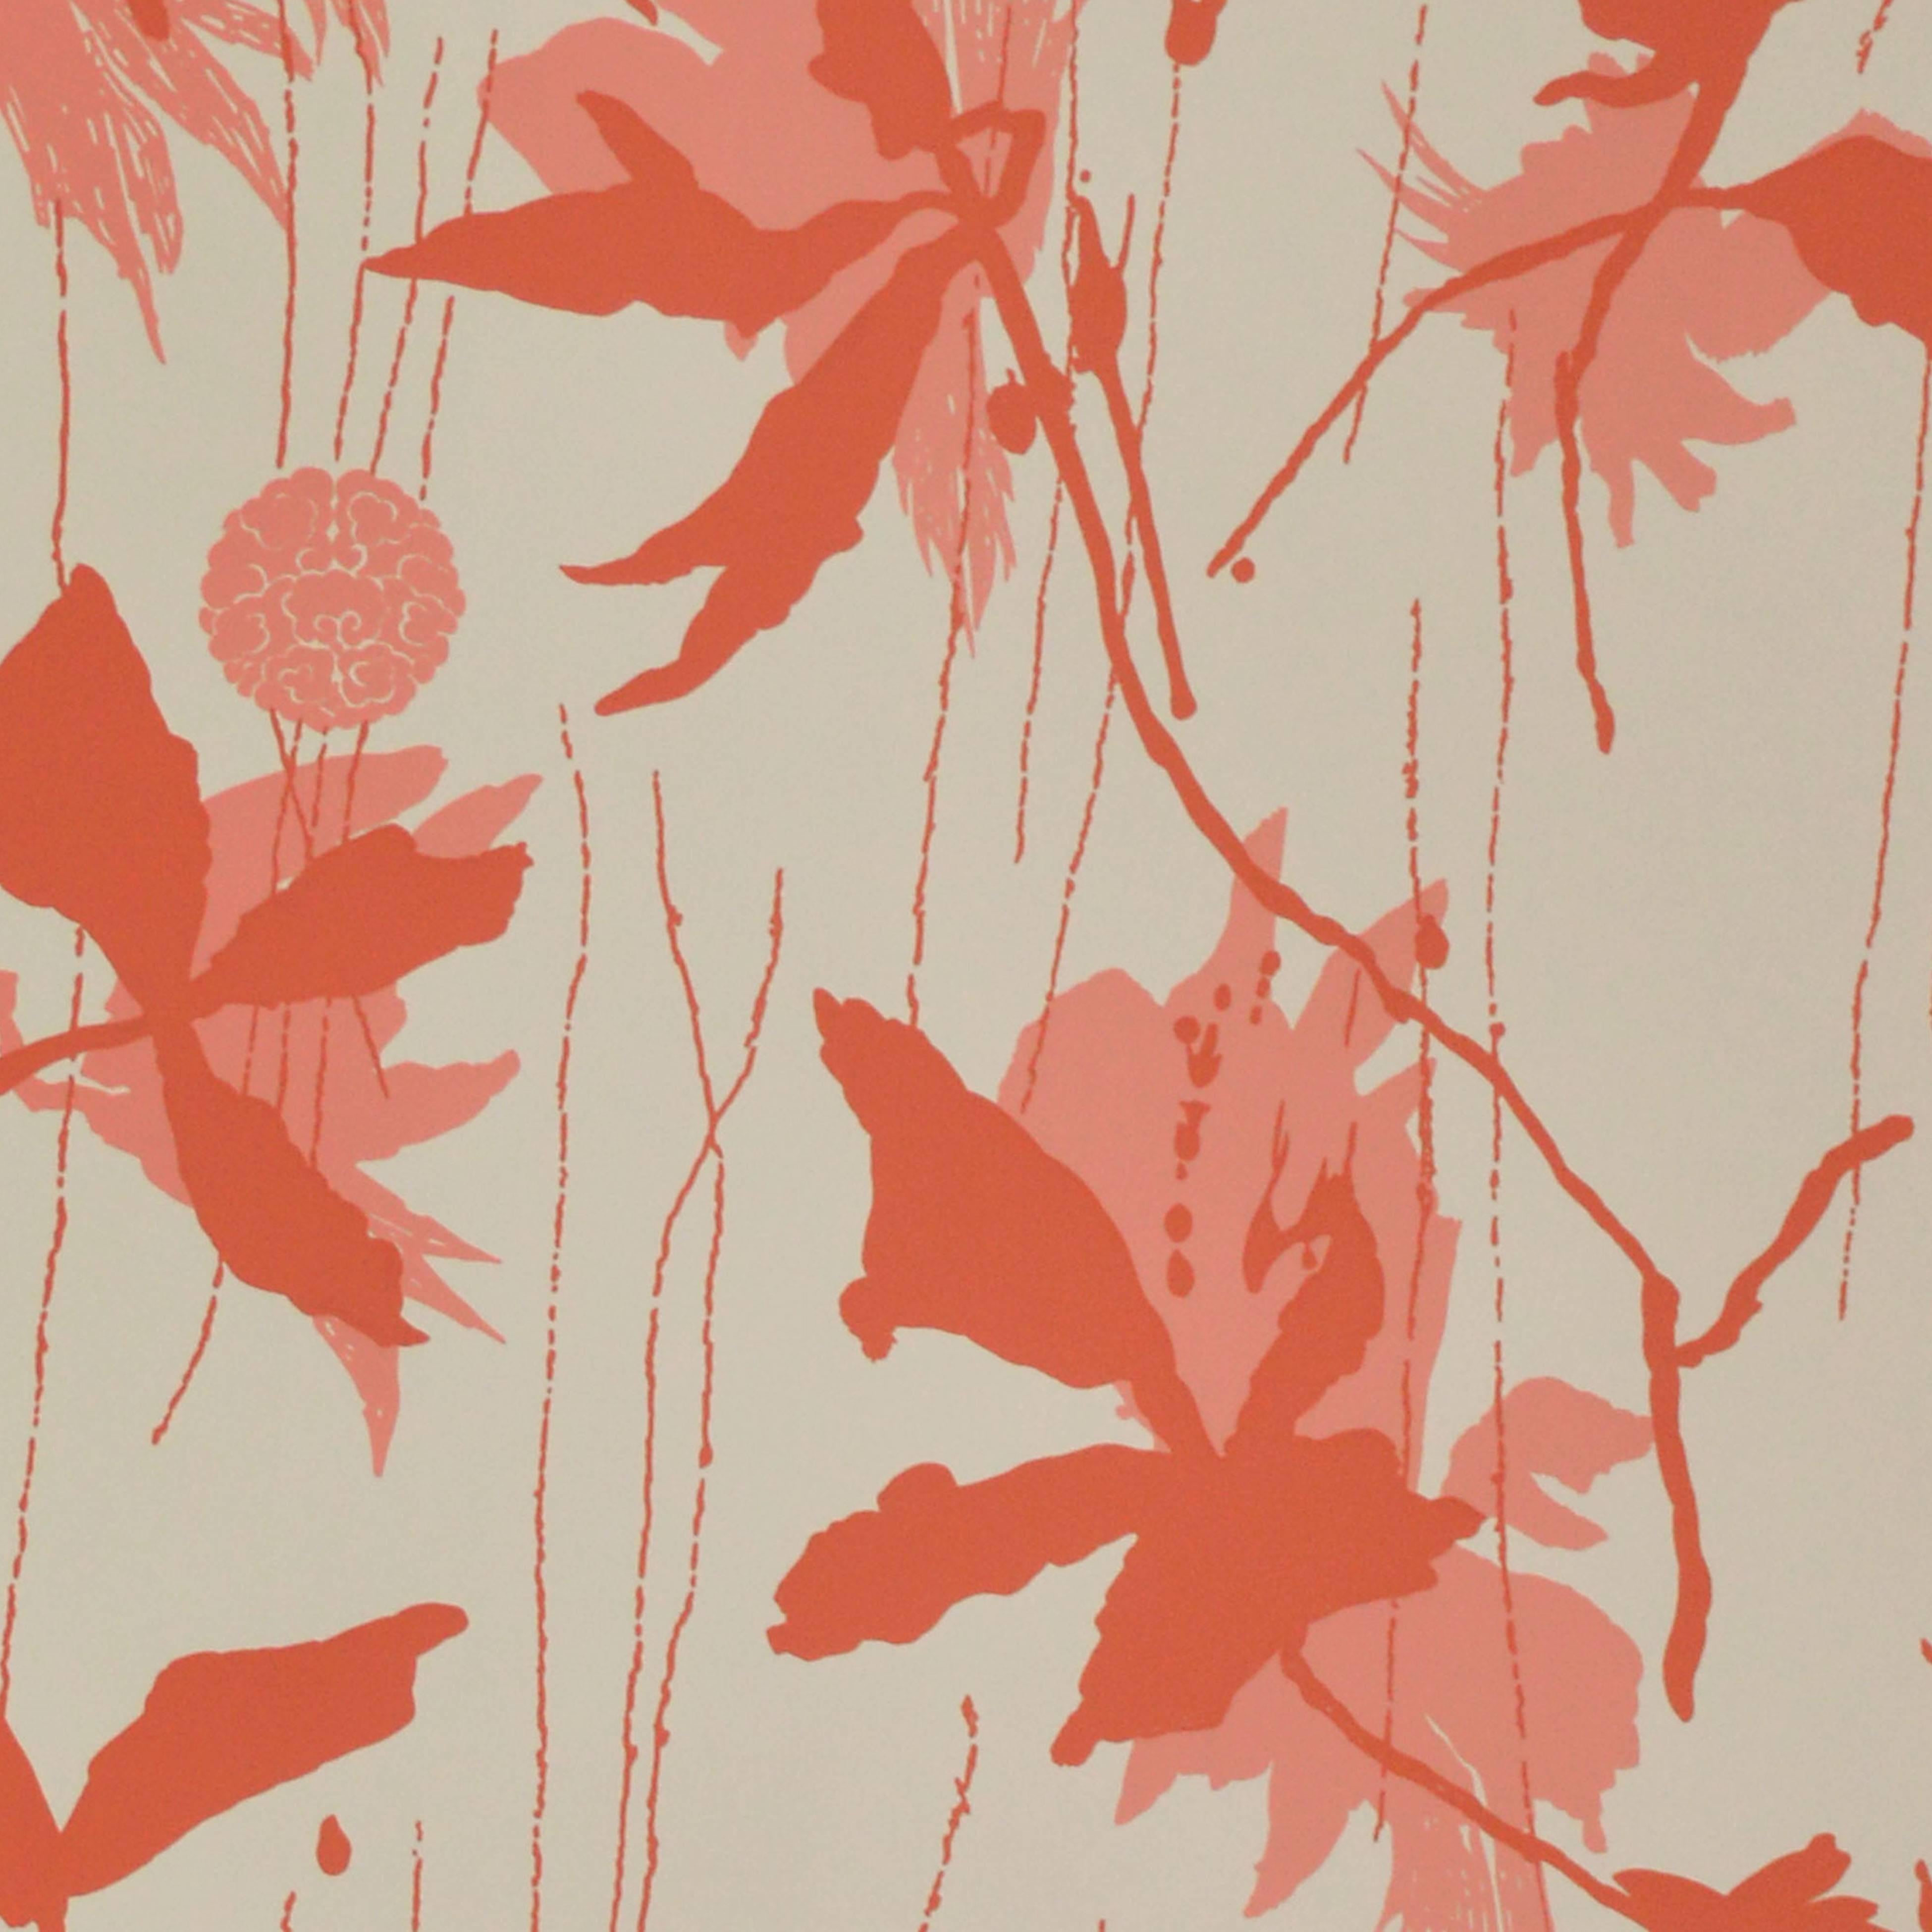 A one-of-a-kind, limited availability wall covering or wallpaper handprinted on handmade Japanese rice paper with the finest inks and richest pigments. Every Porter Teleo product is hand-painted by artists, making every wall covering or wallpaper a